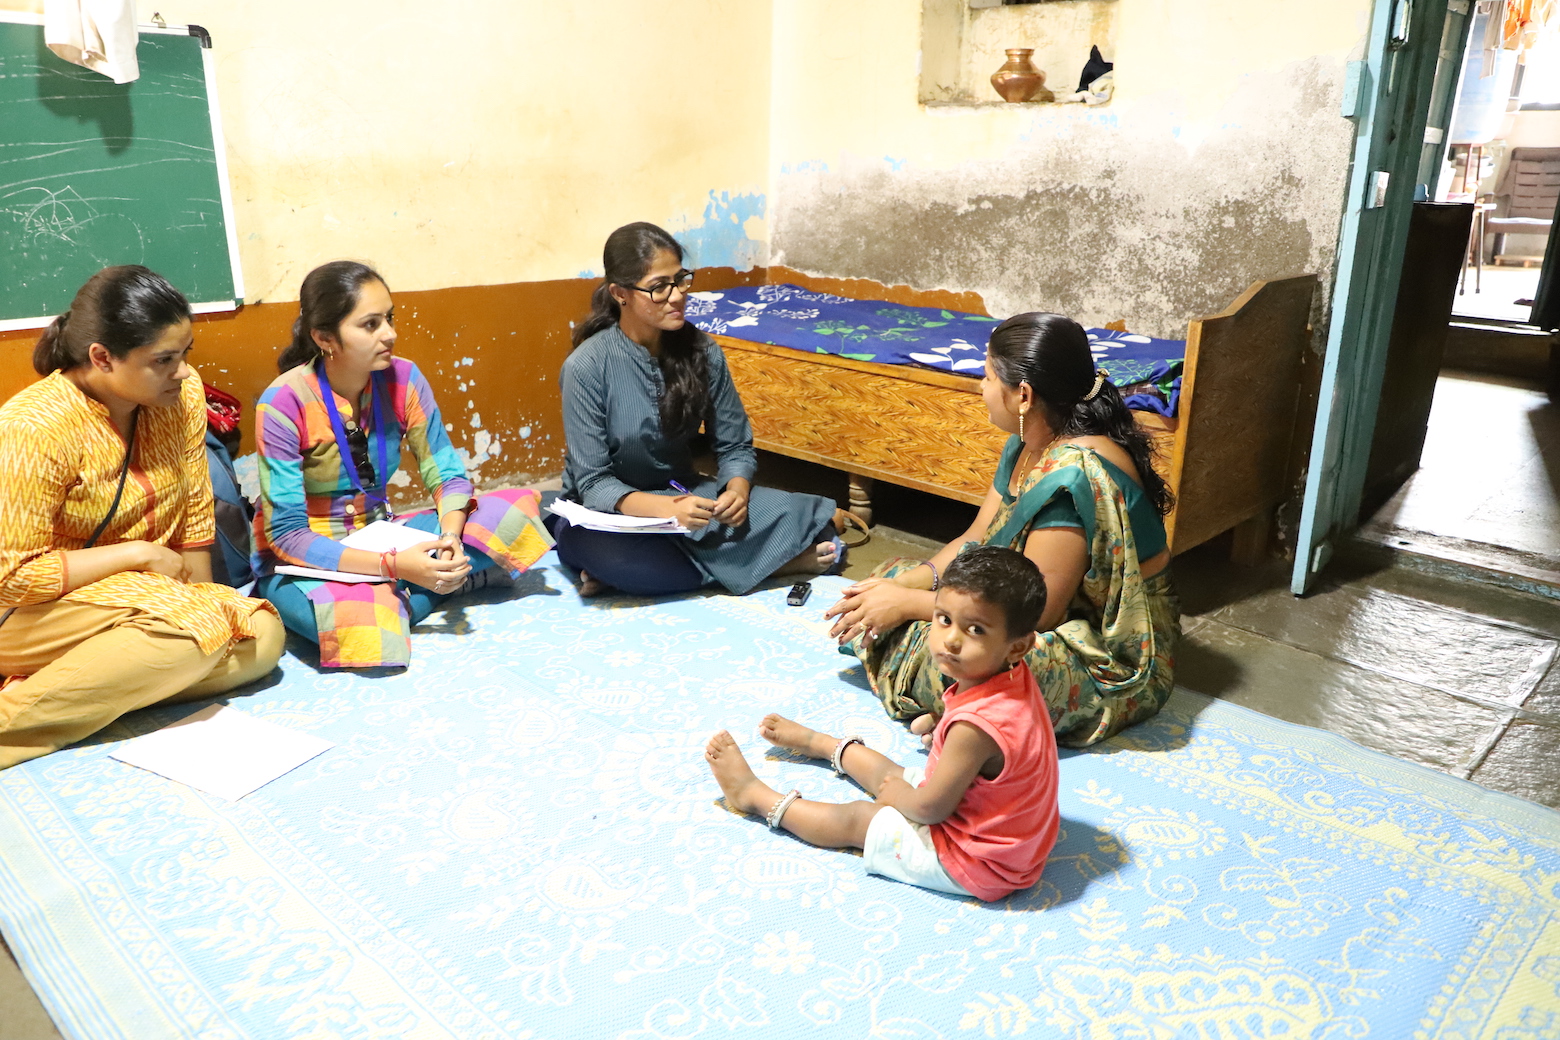 Four women and a child meet together during the CHARM2 trial in Maharashtra, India. Photo: Mr. Gopinath Shinde; CHARM2 Project in Maharashtra, India.